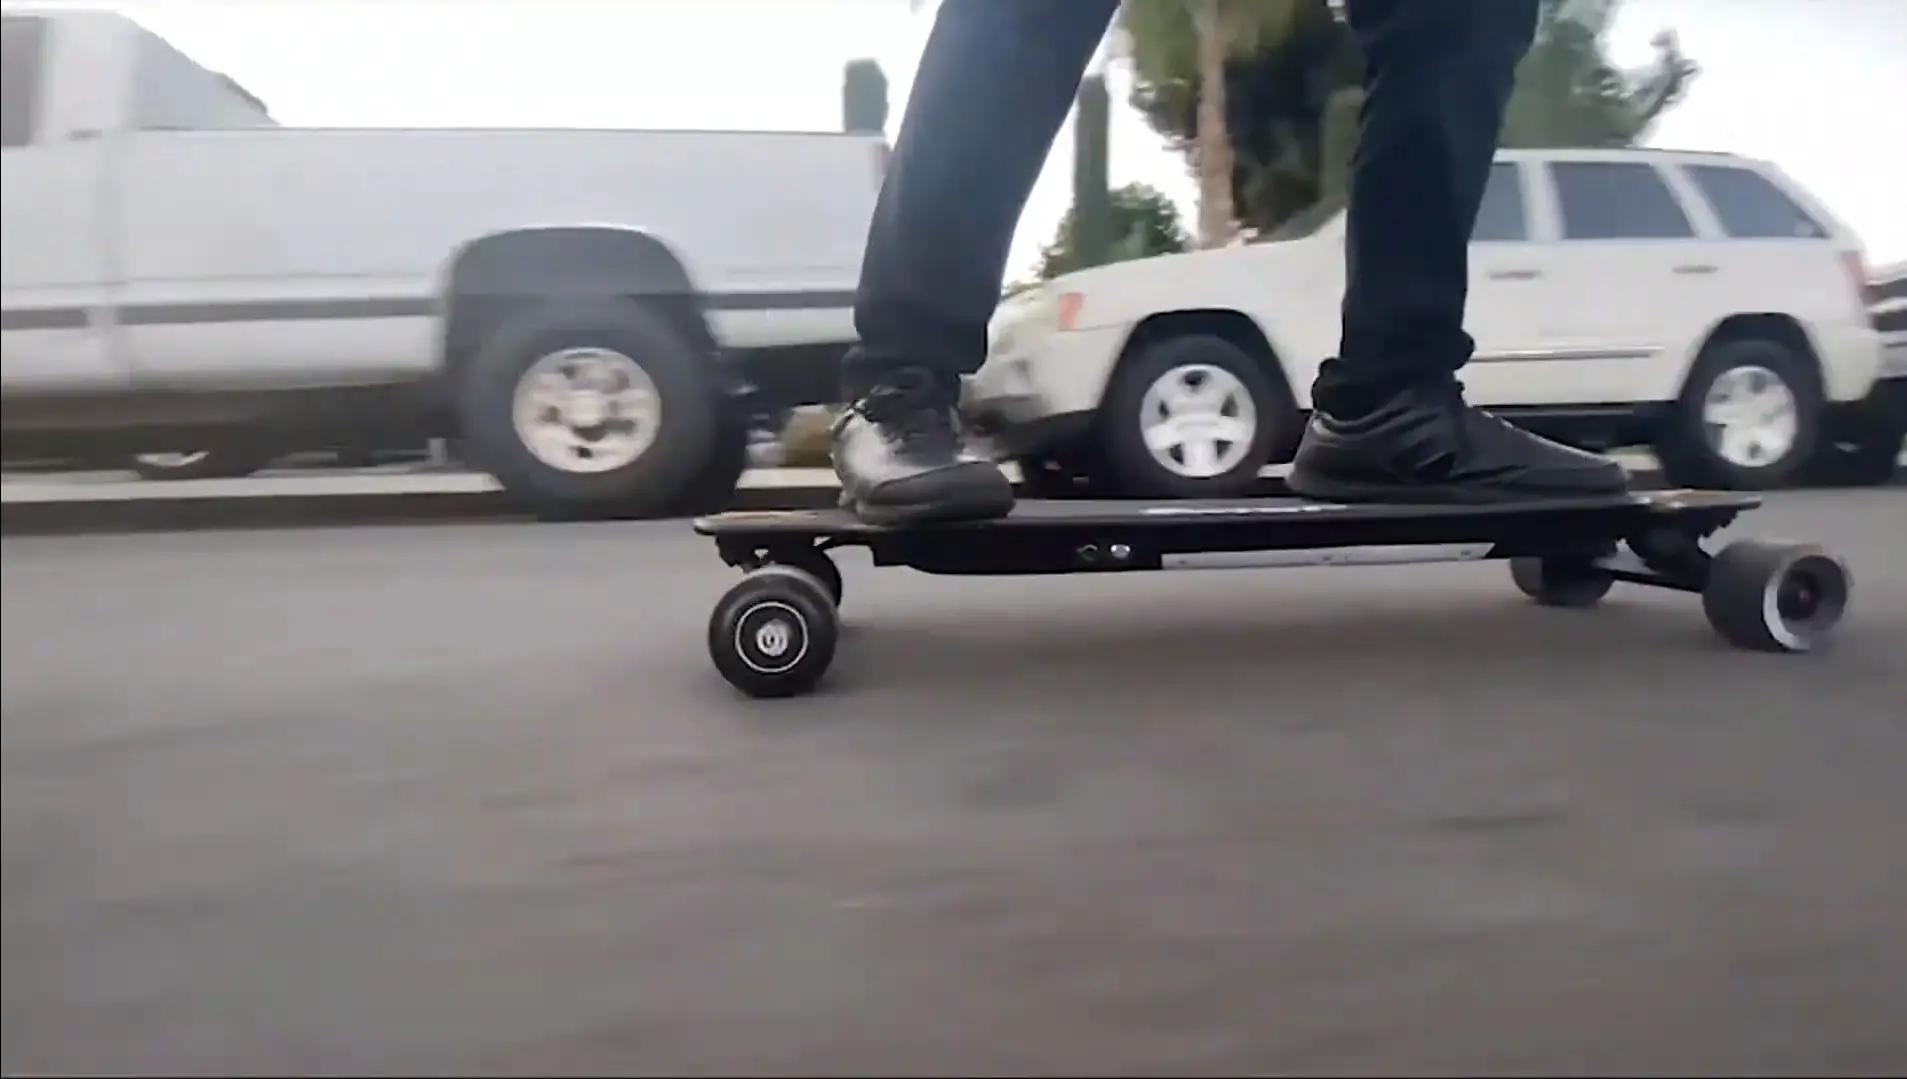 experience on JKING Electric Skateboard